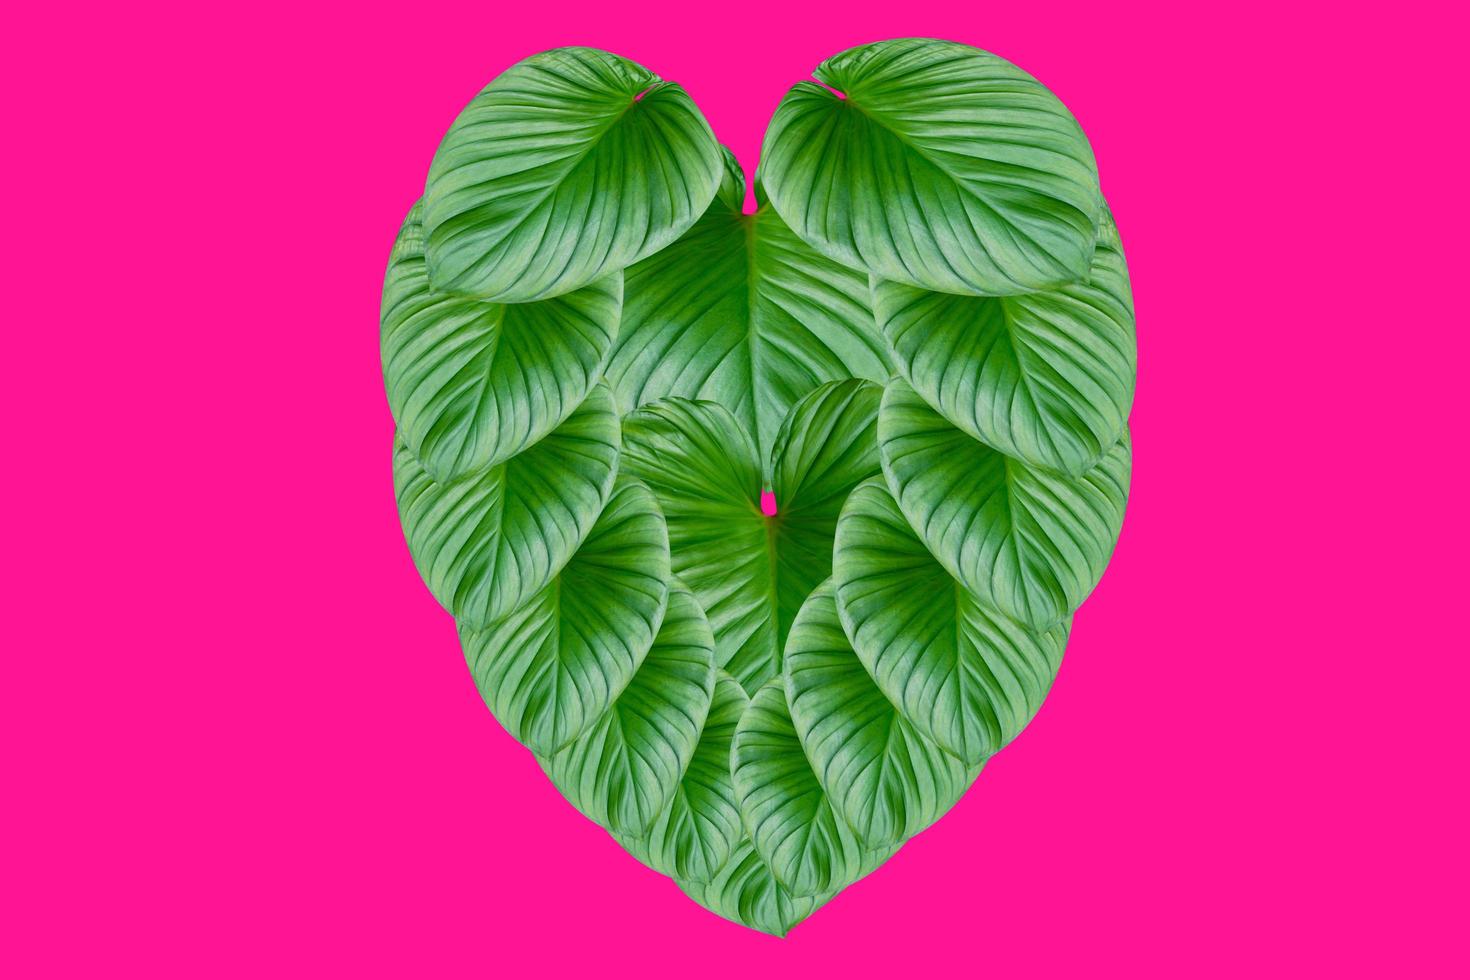 Green leaves heart-shaped  for valentines day concept,leaf homalomena rubescens tree on pink background photo